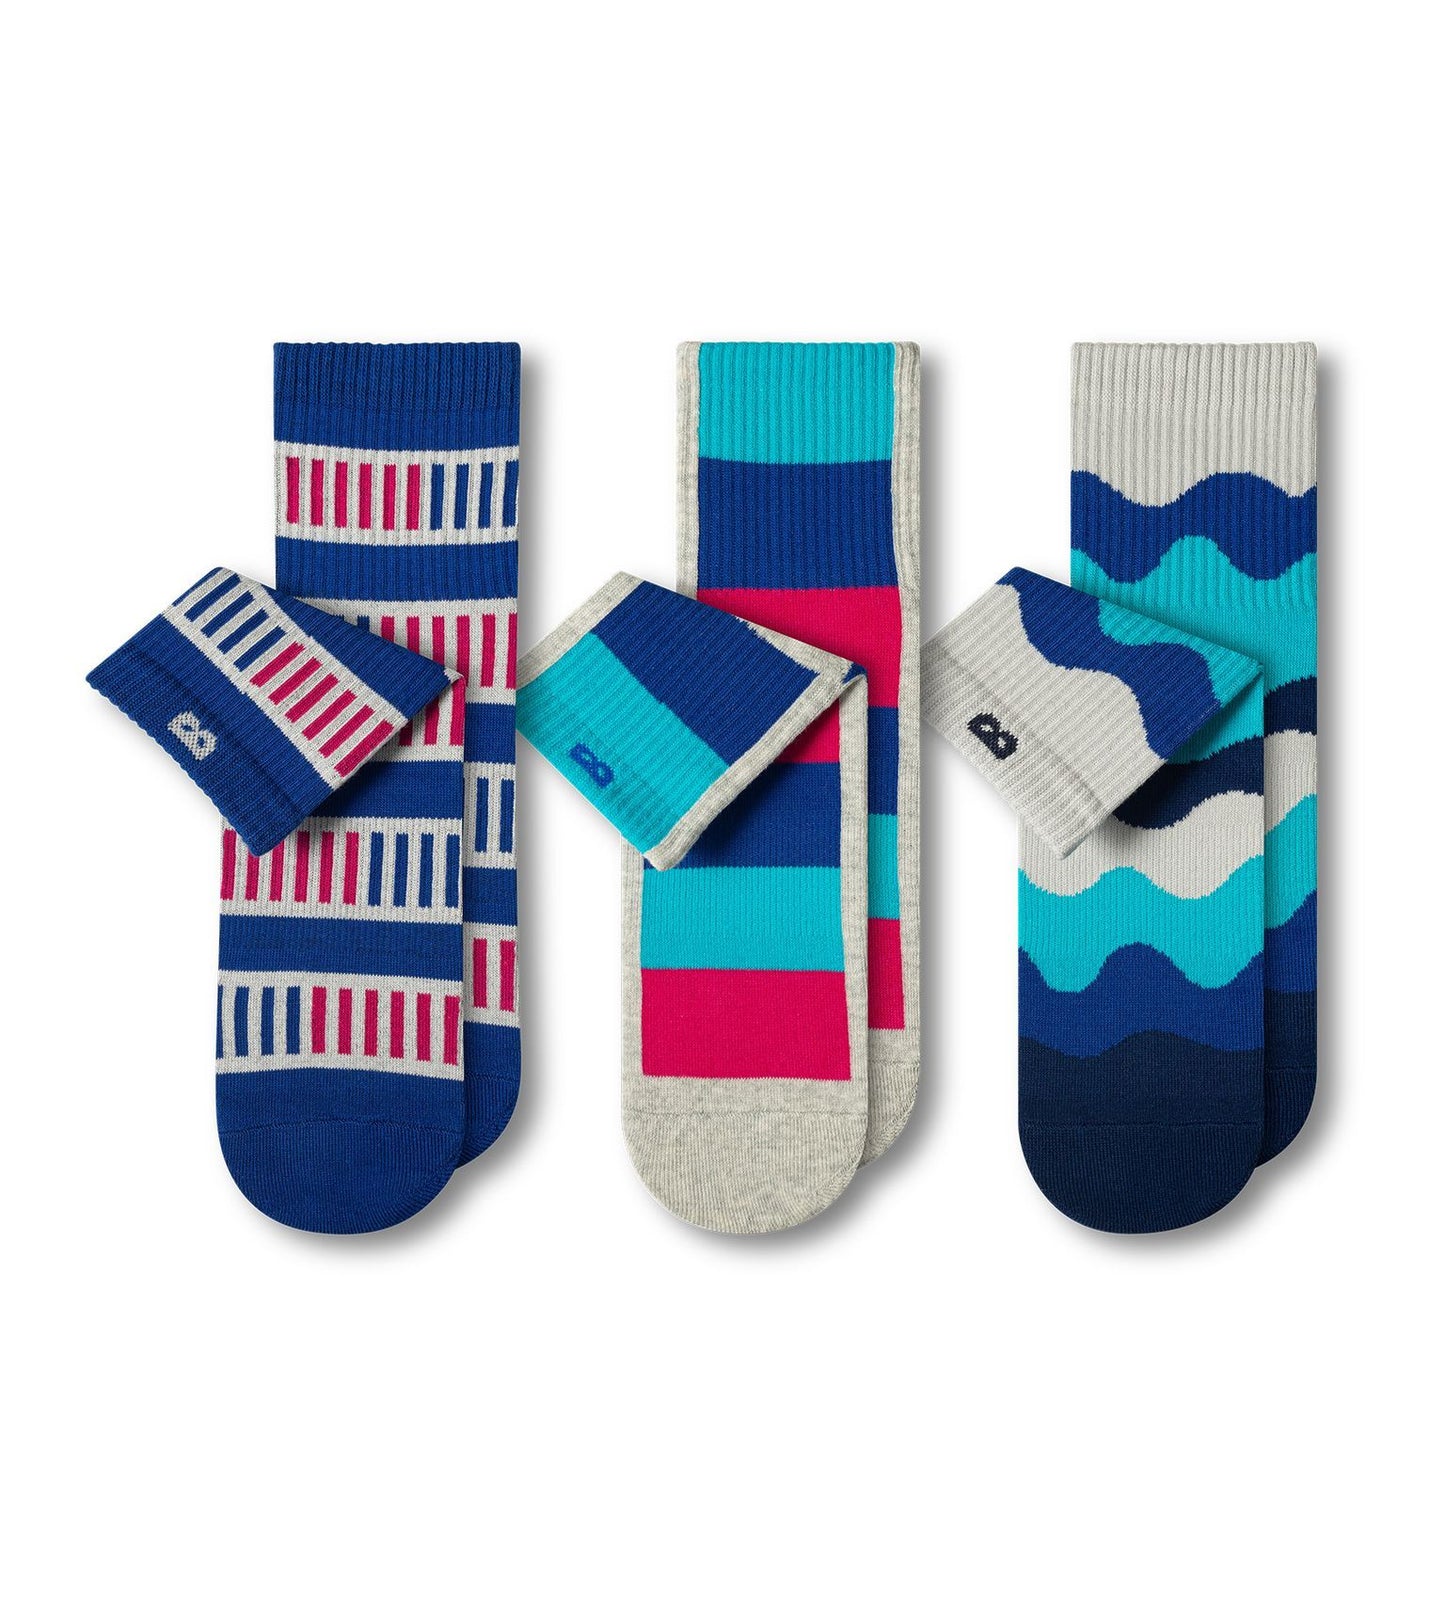 Blue and turquoise cushion ankle socks with pattern